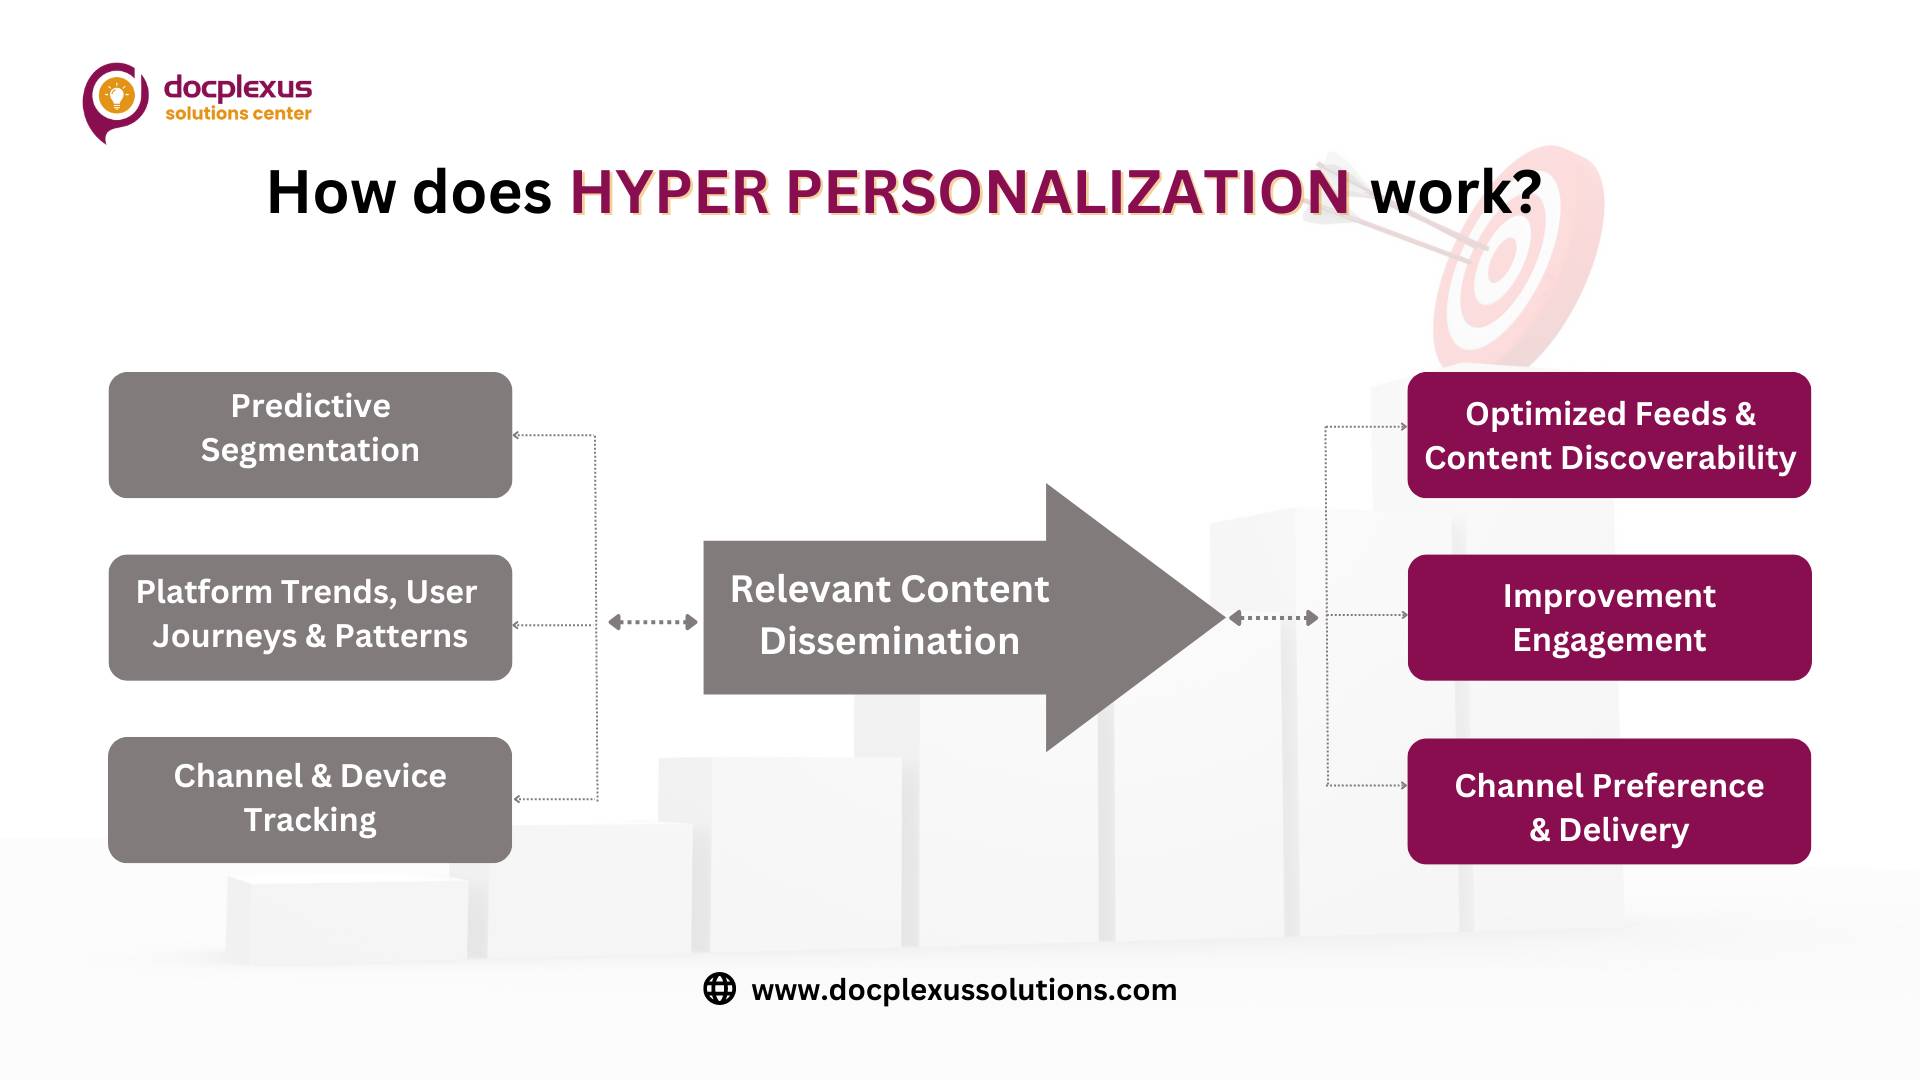 How Hyper personalisation work for HCPs